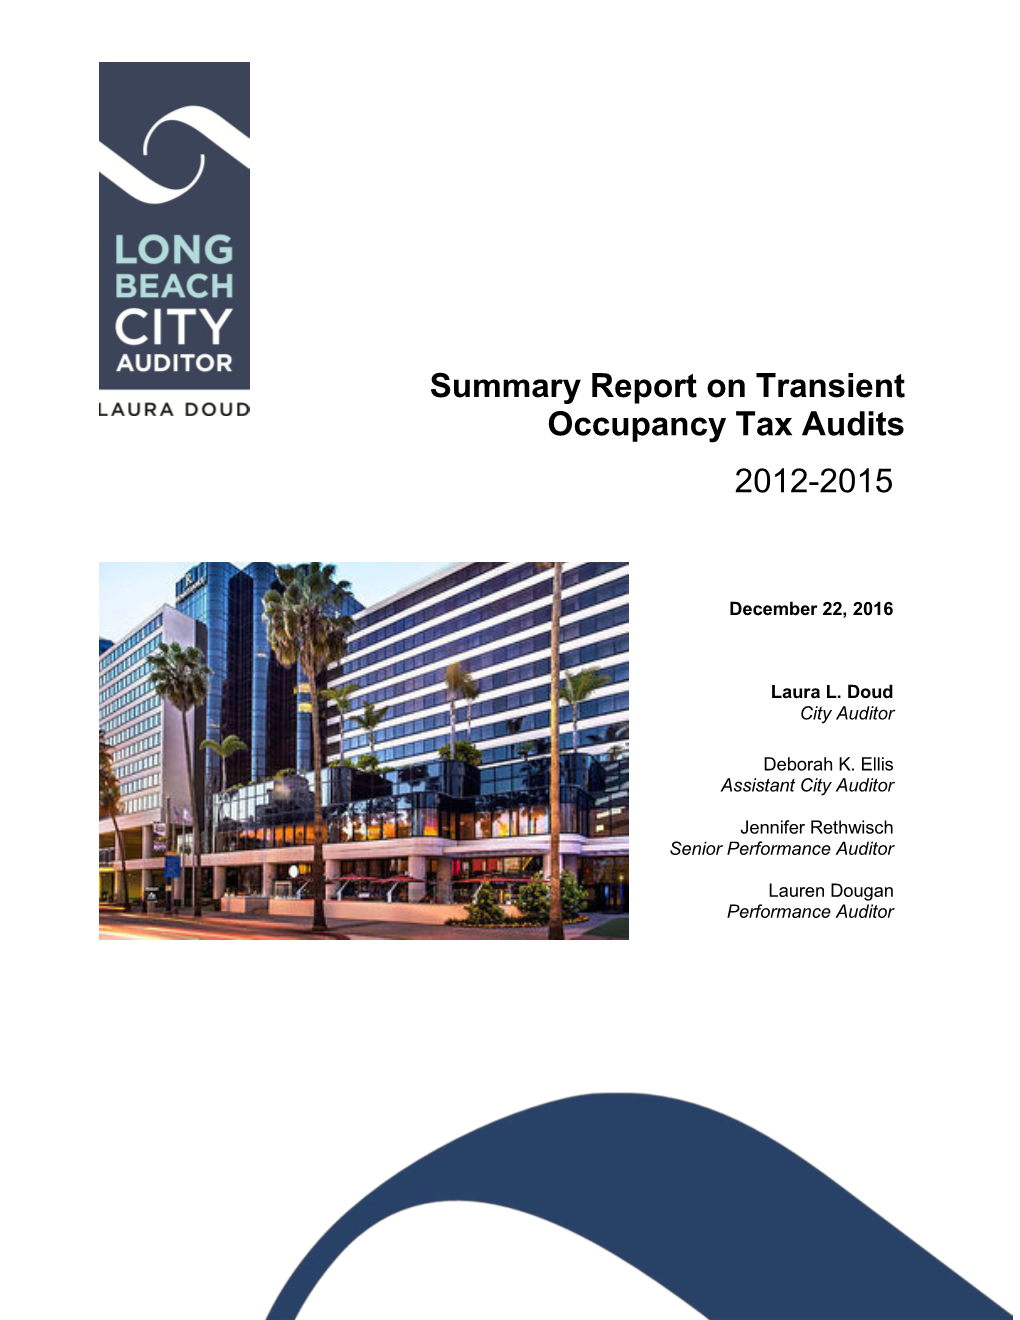 Summary Report on Transient Occupancy Tax Audits 2012-2015